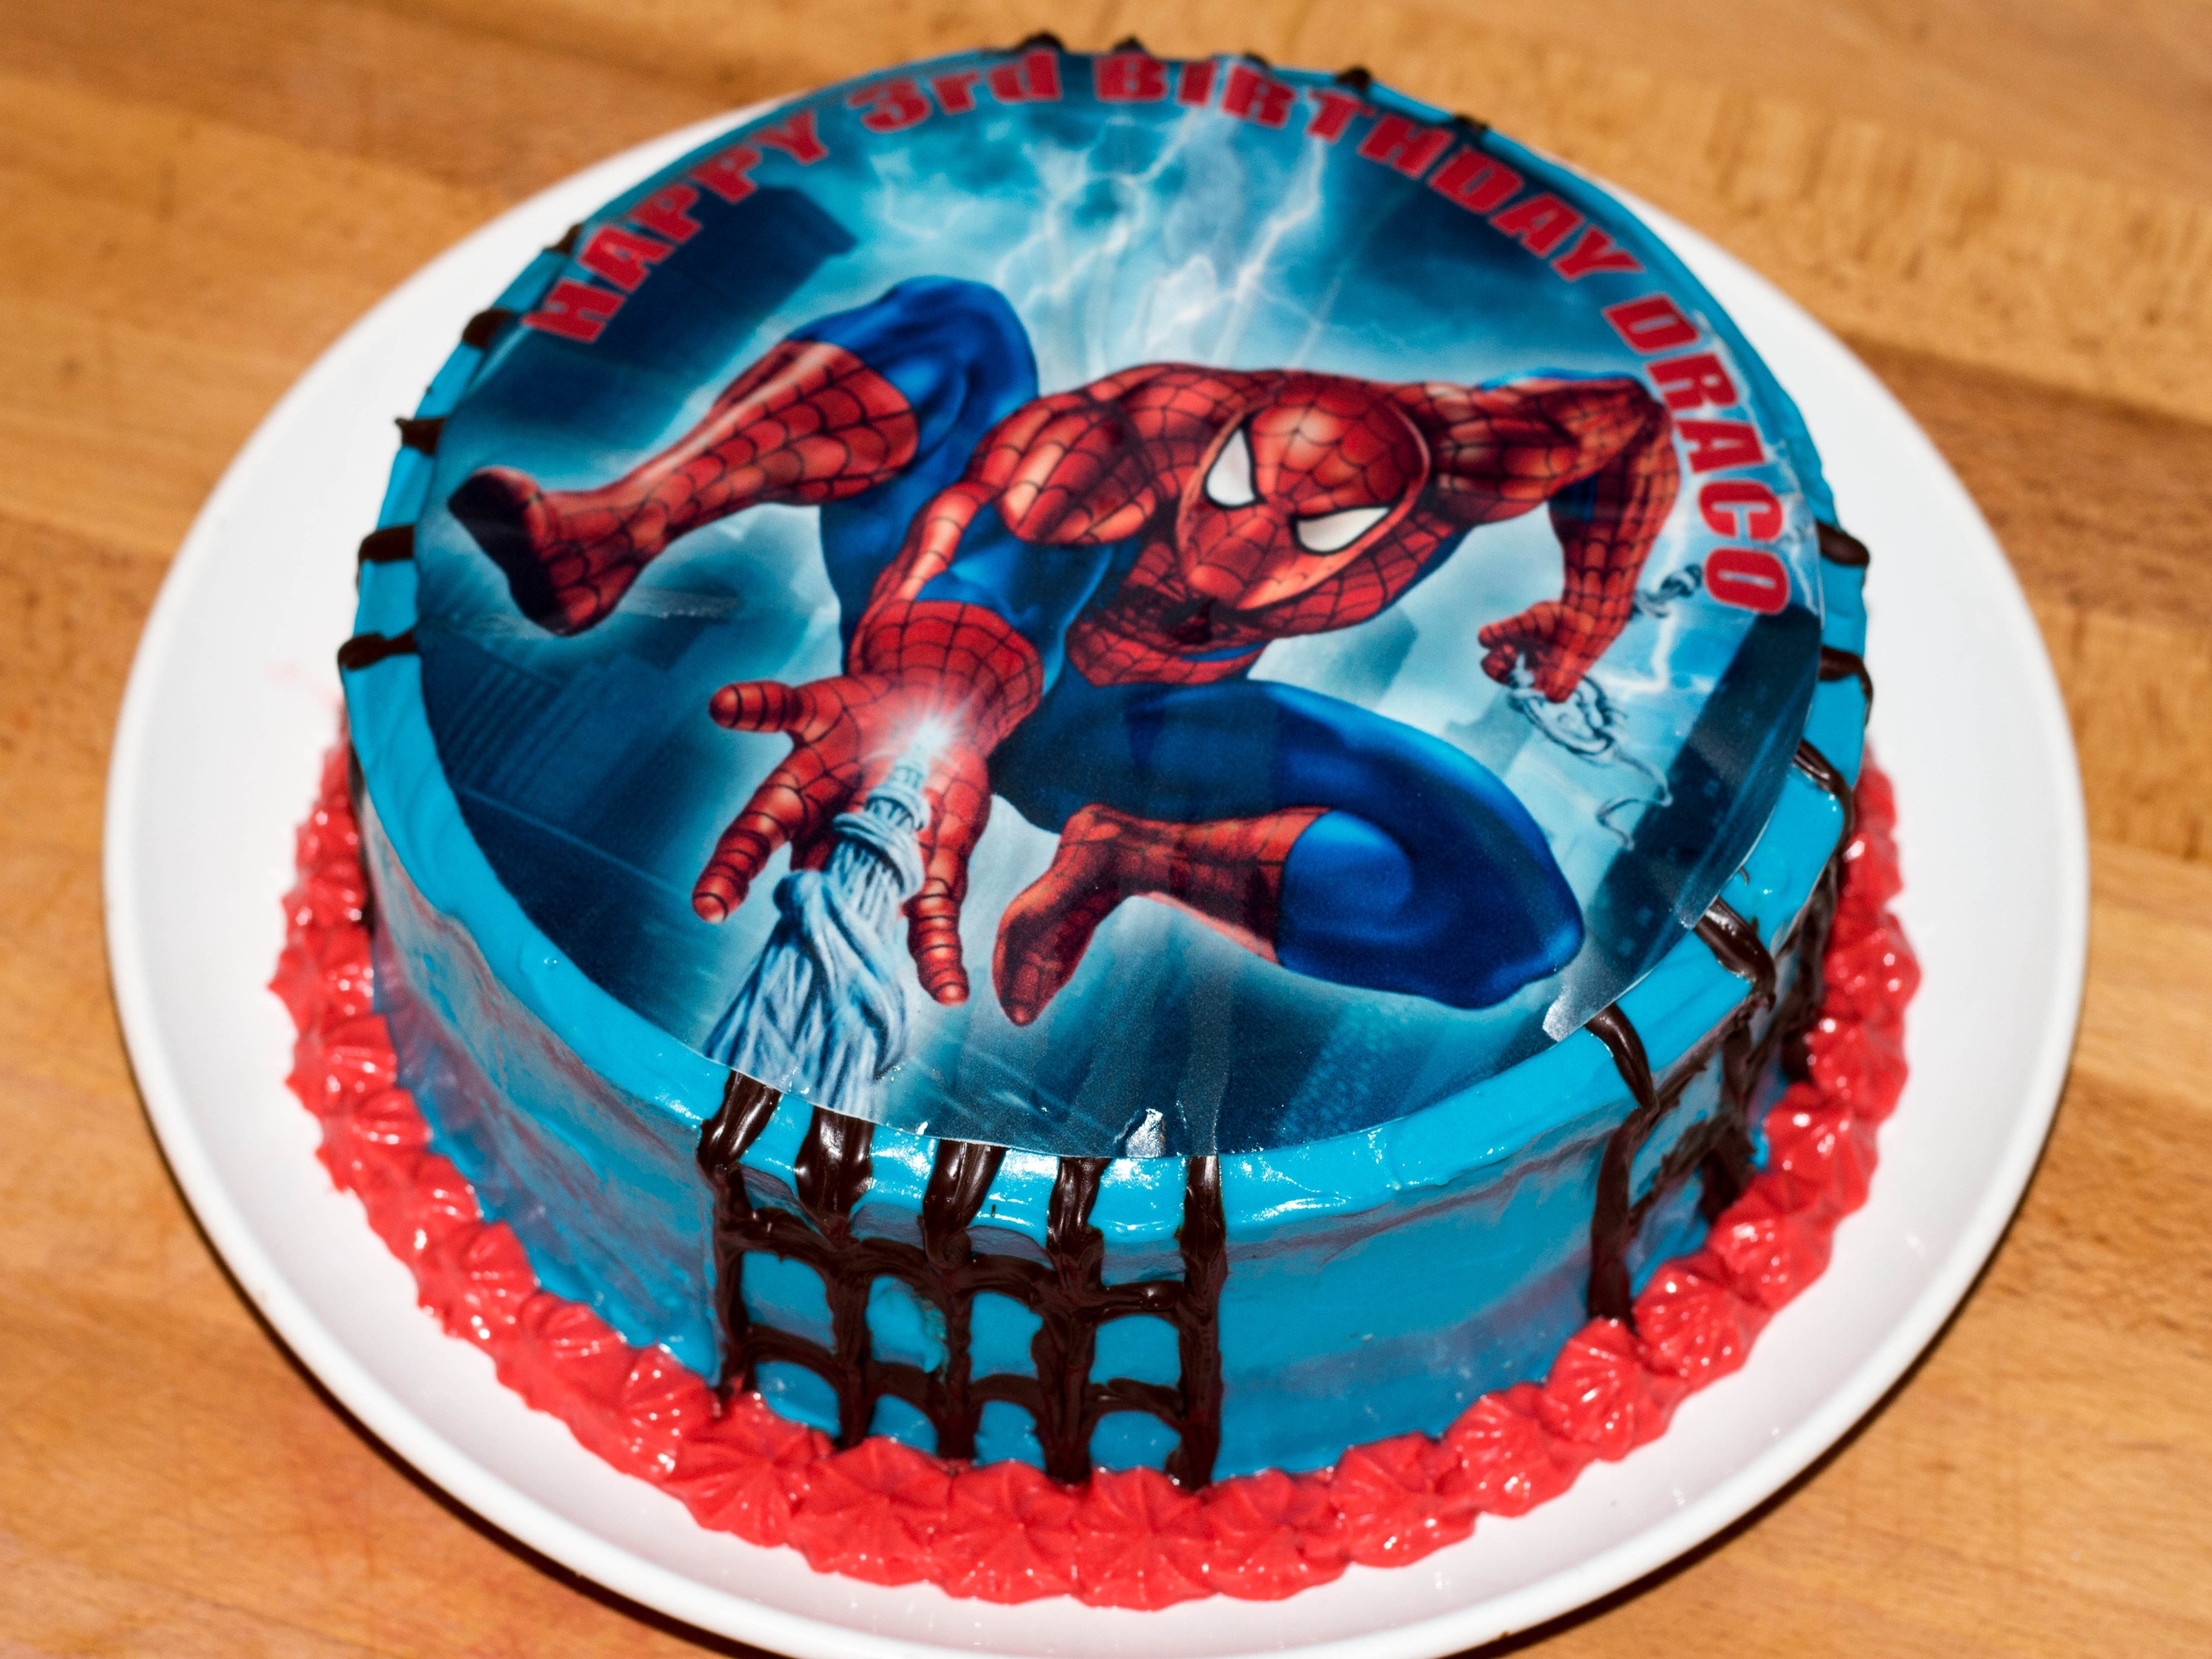 Spiderman Cakes That Are So Cool and Fancy for Boys Birthdays ...